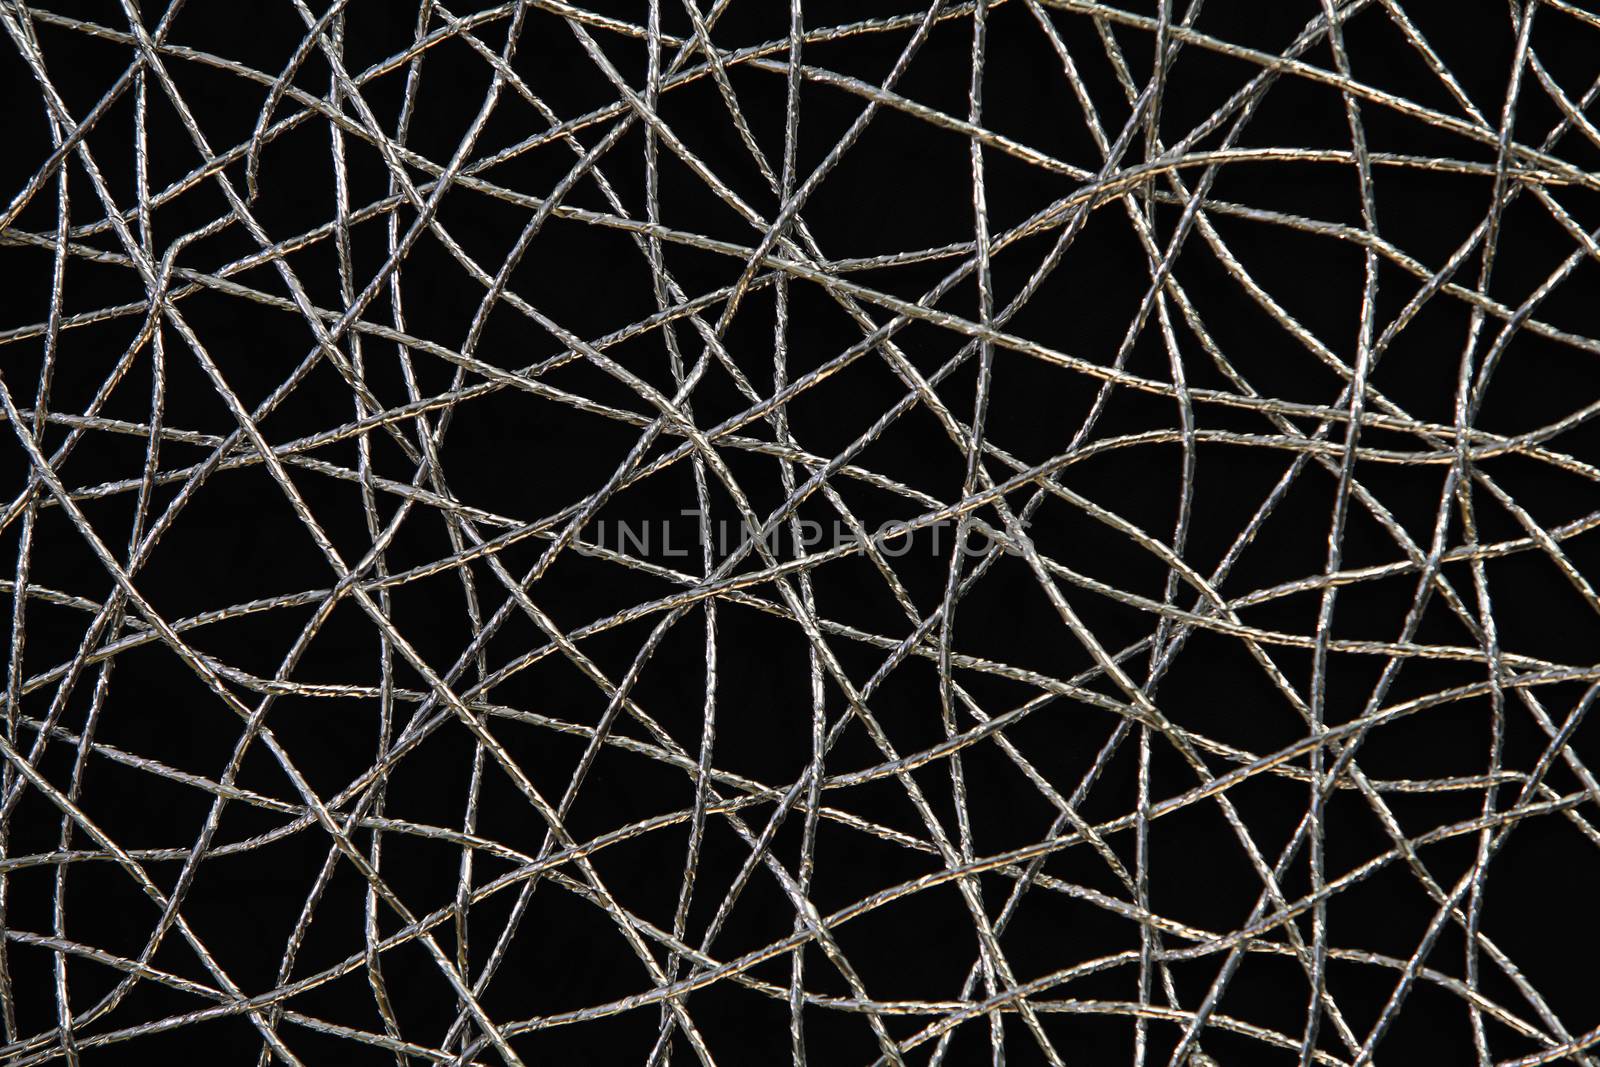 Chaotic weave of silver threads on black, abstract background